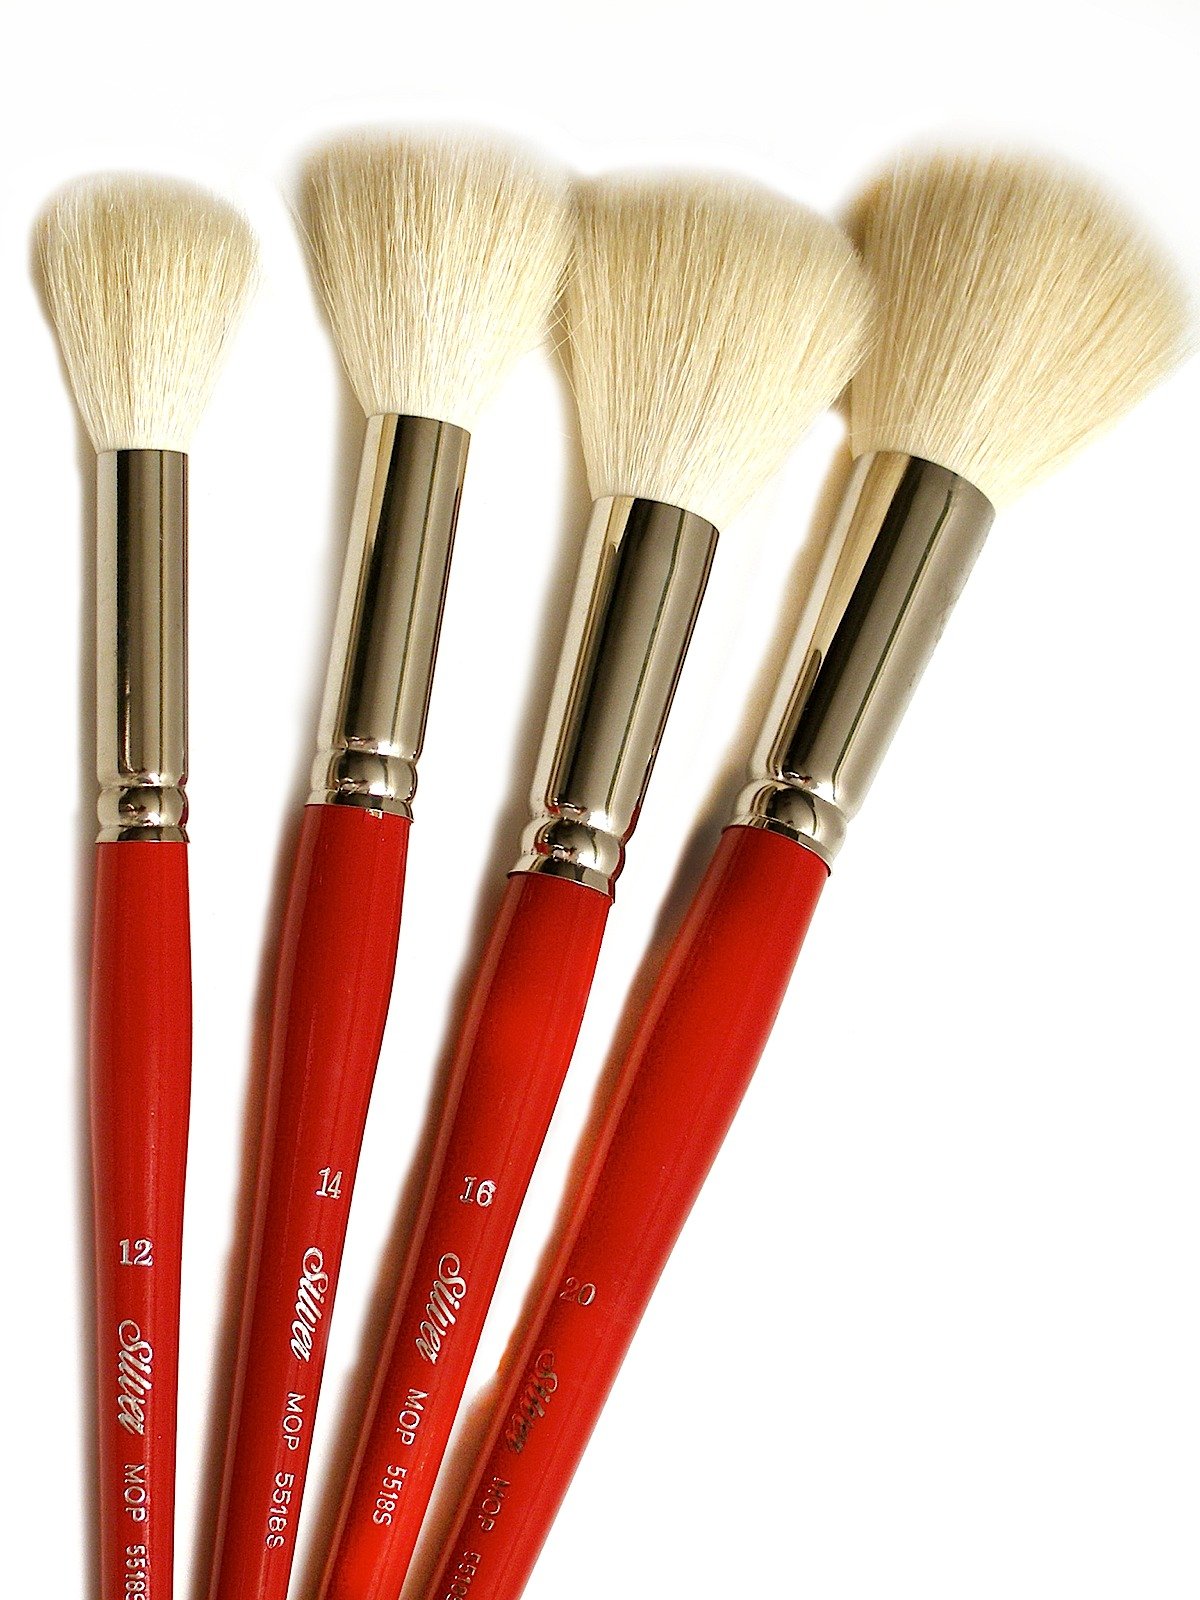 Silver Brush - White Round/Oval Mop Brushes